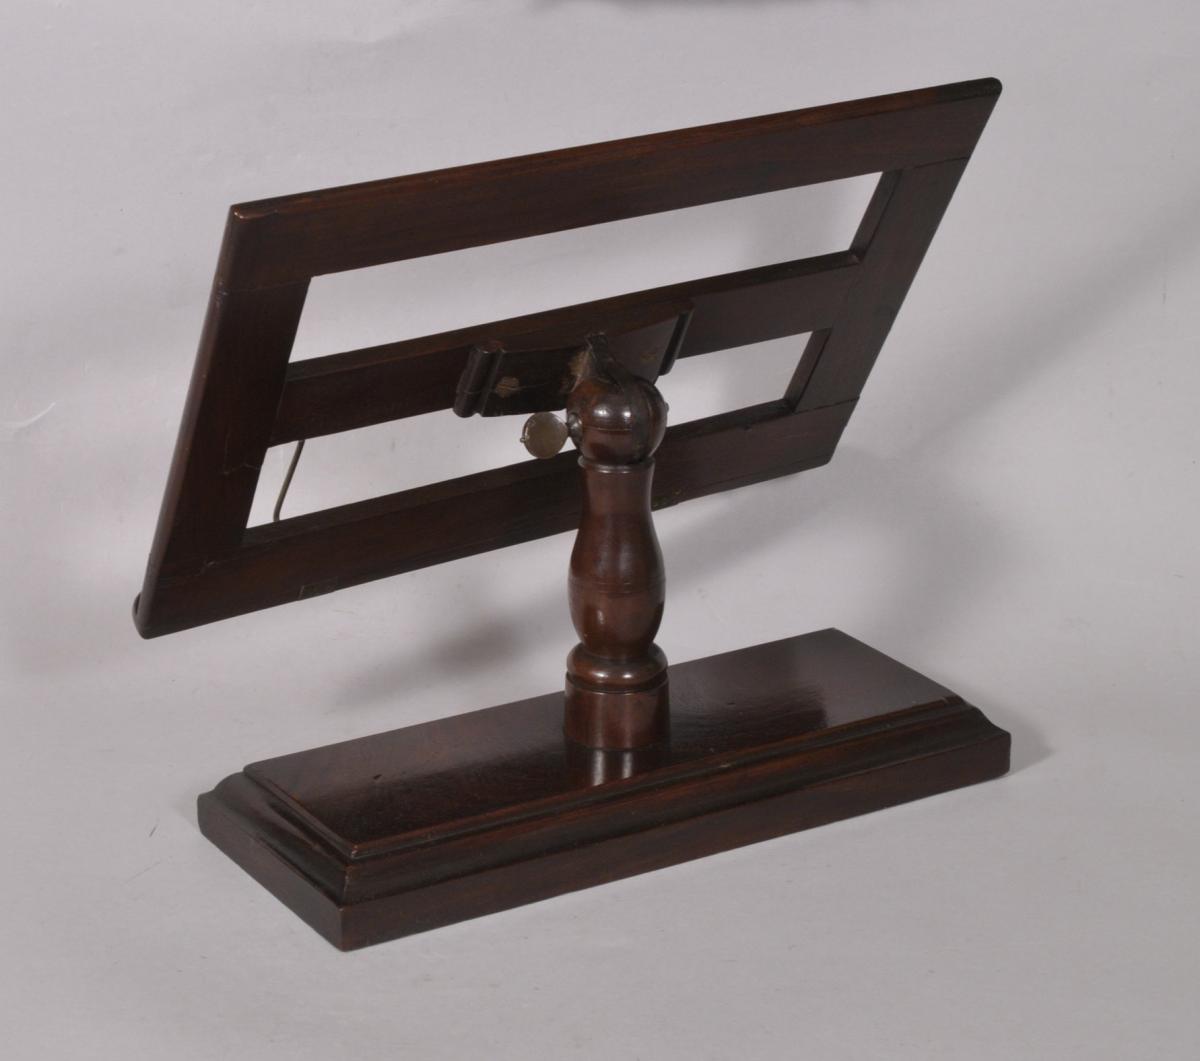 S/5624 Antique Treen Early 19th Century Adjustable Mahogany Table Top Book Rest